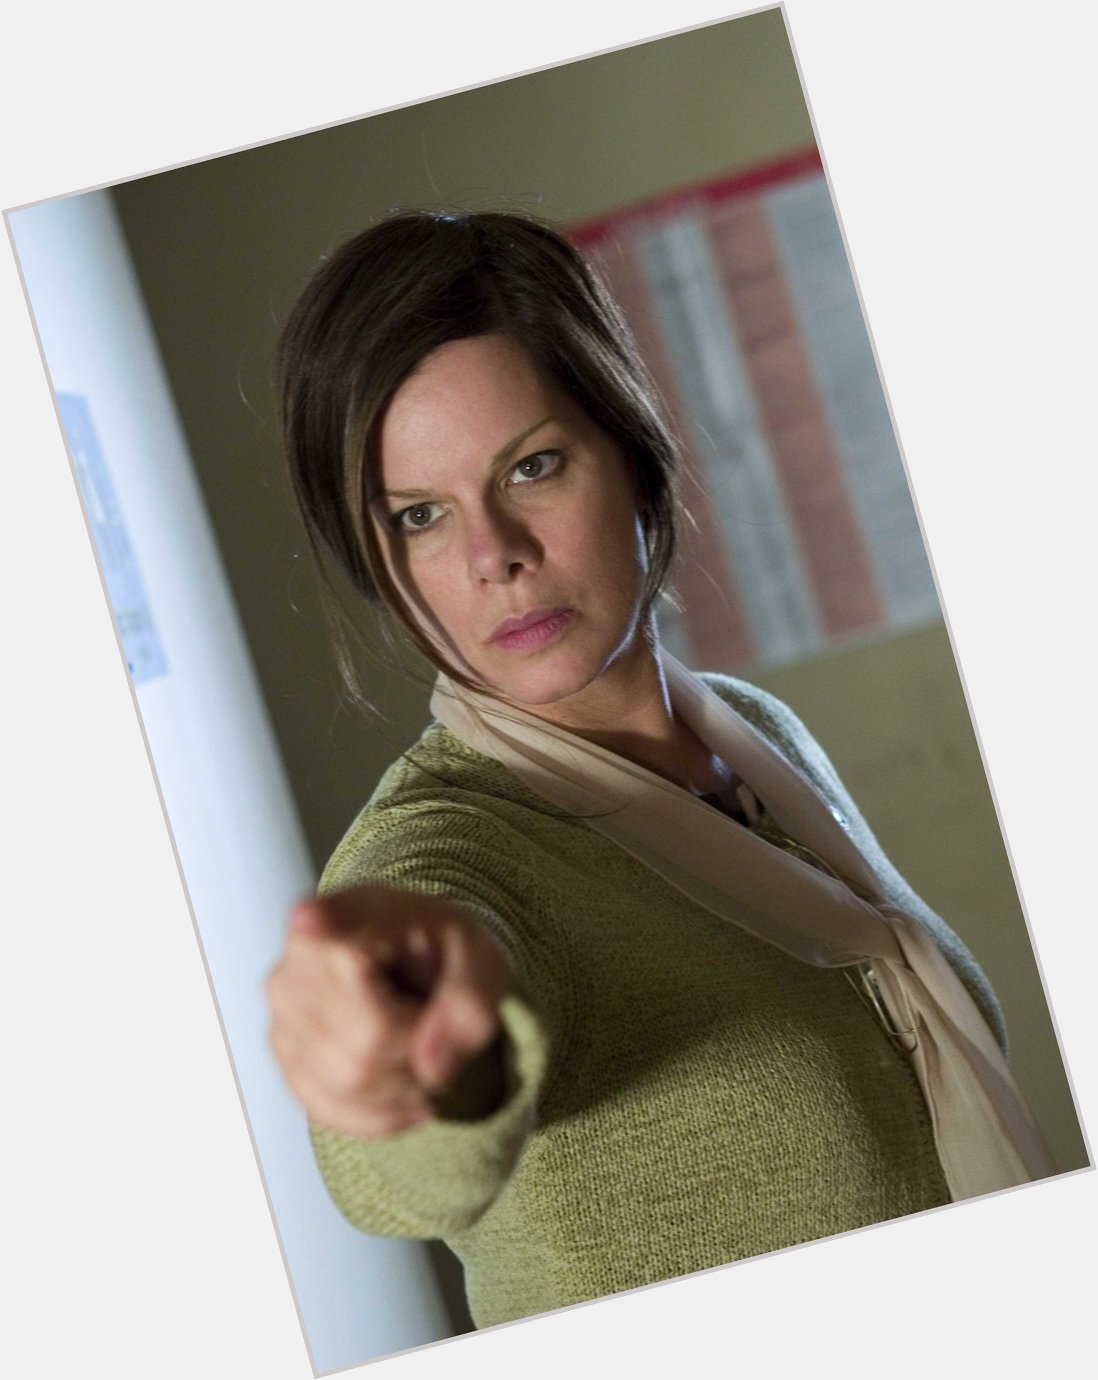 Happy birthday to Marcia Gay Harden, who turns 63 years old today! 